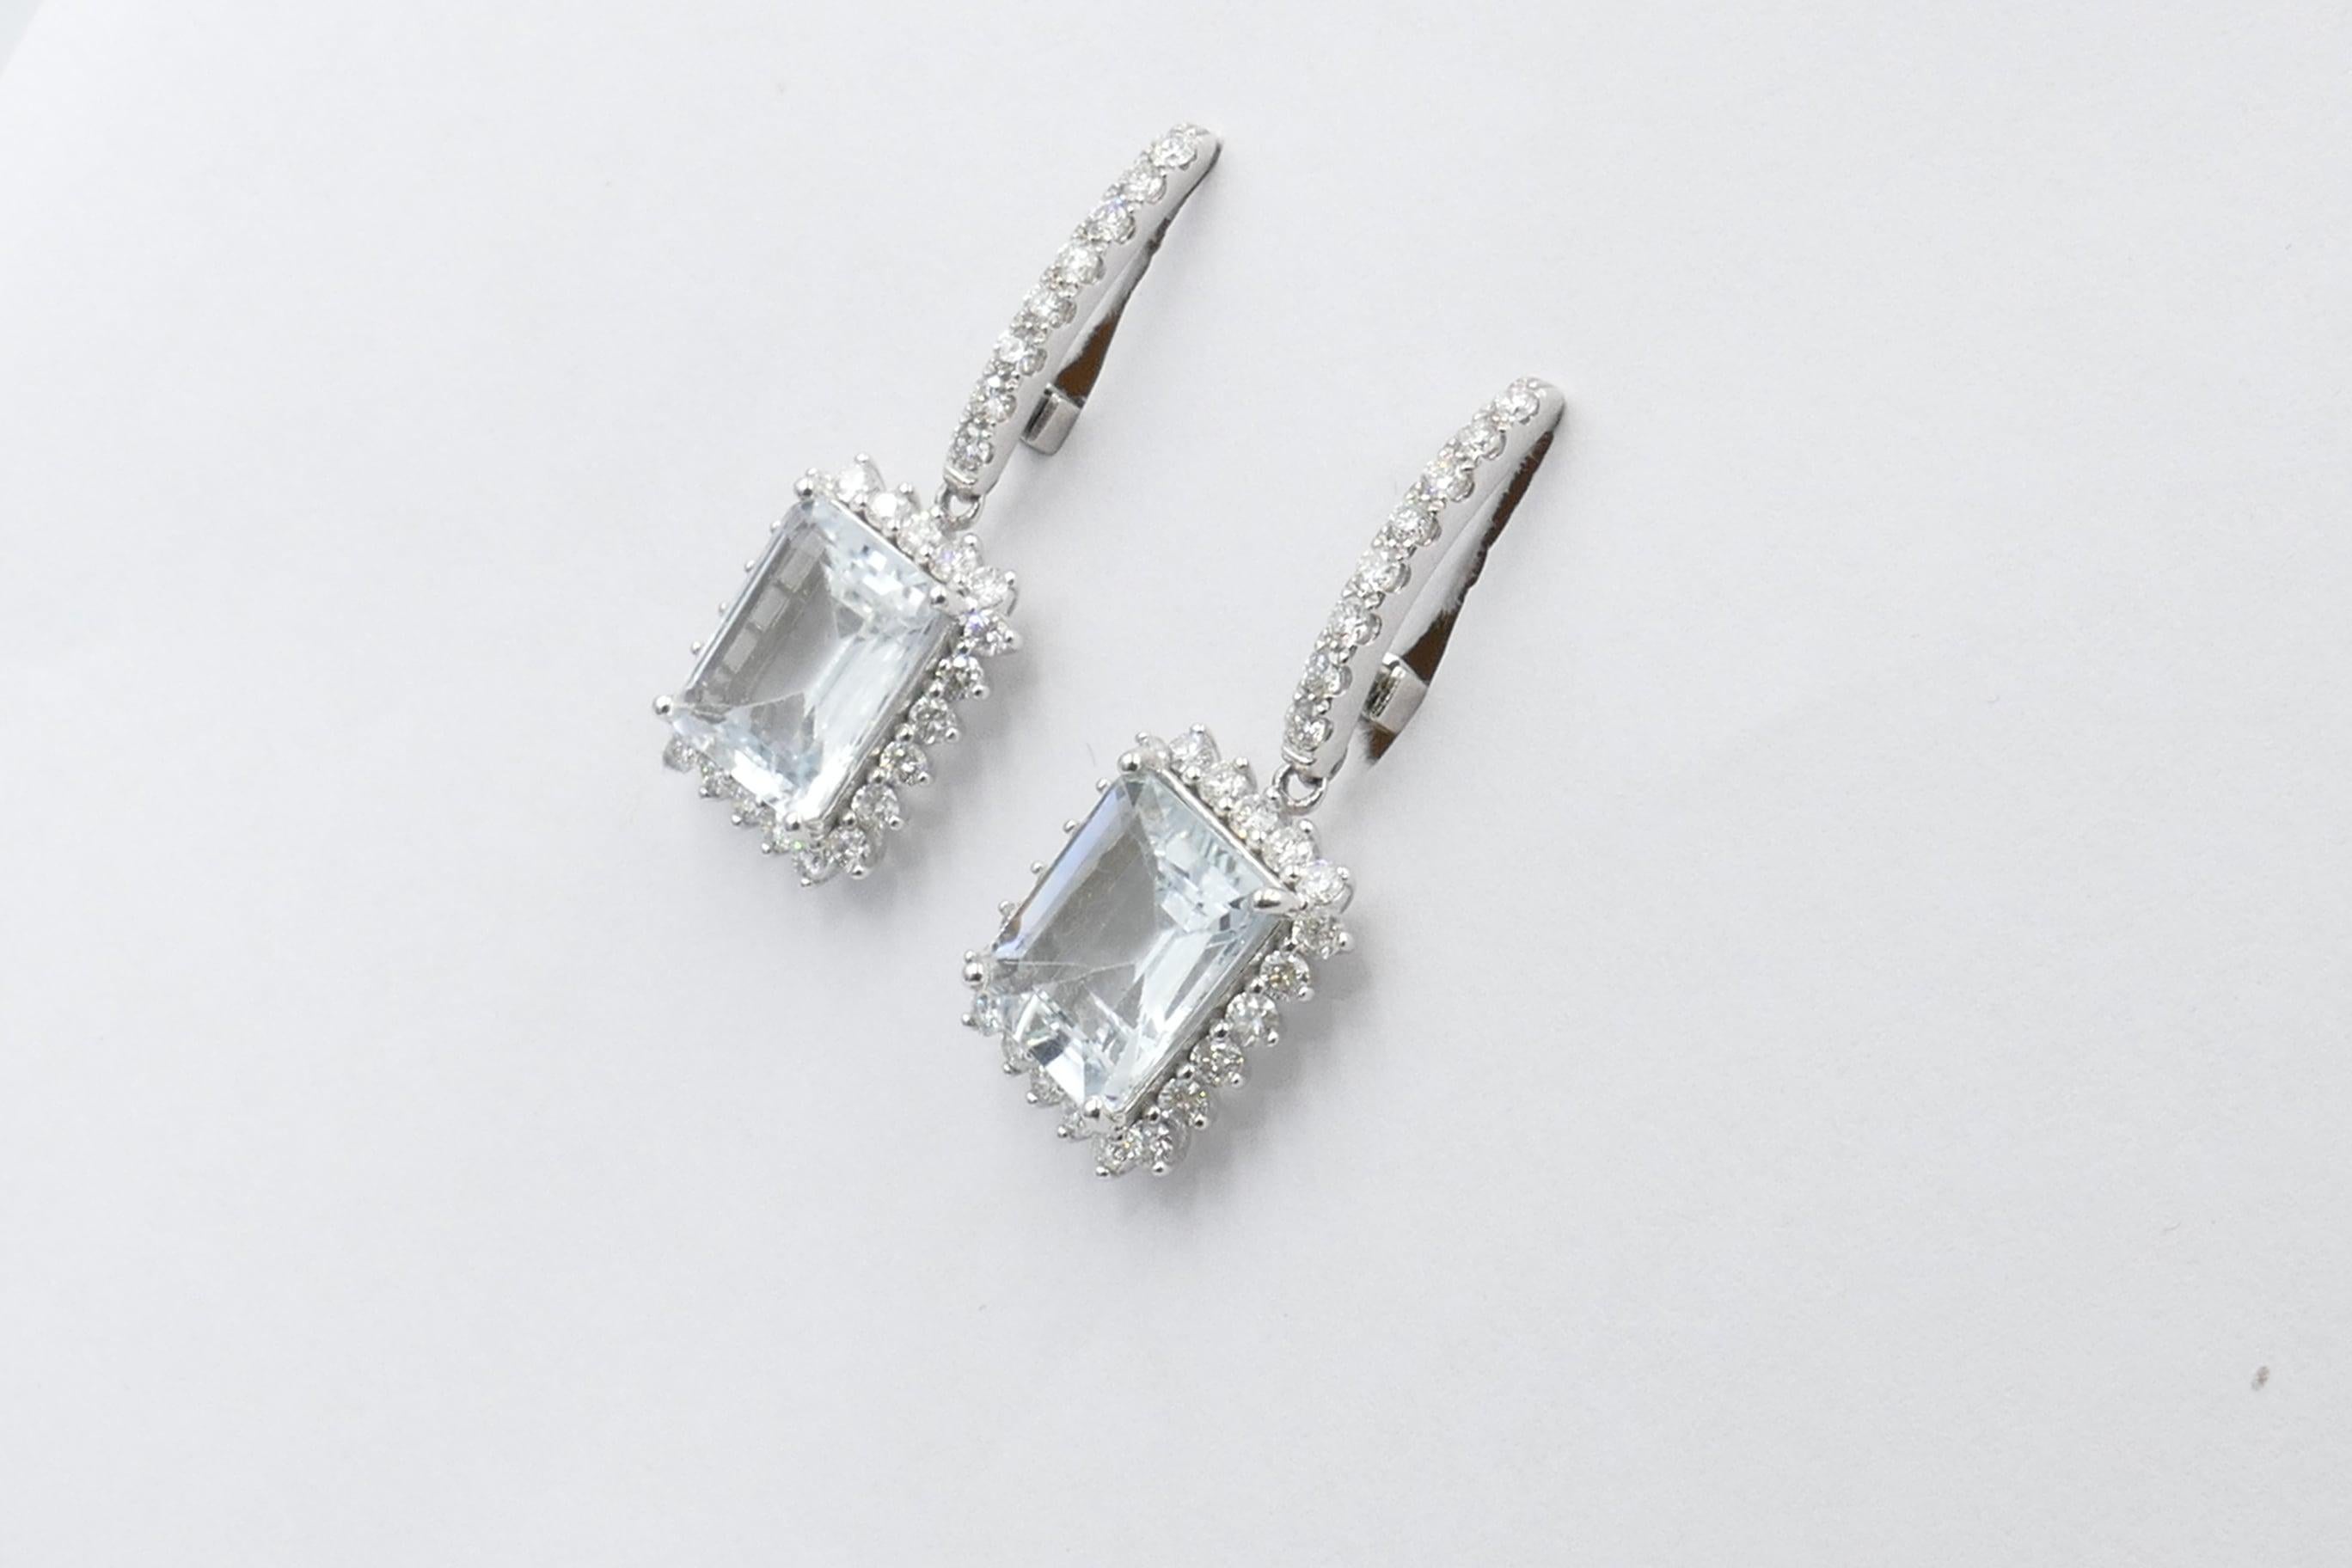 2 Aquamarine Emerald Cut Stones of 3.4+ carats, light blue in colour, eye-clean, individually 4 claw set are the Centrepiece of these very beautiful Earrings.
The Stones are surrounded by 60 Brilliant Cut Diamonds, Micro-claw set, Colour H-J,